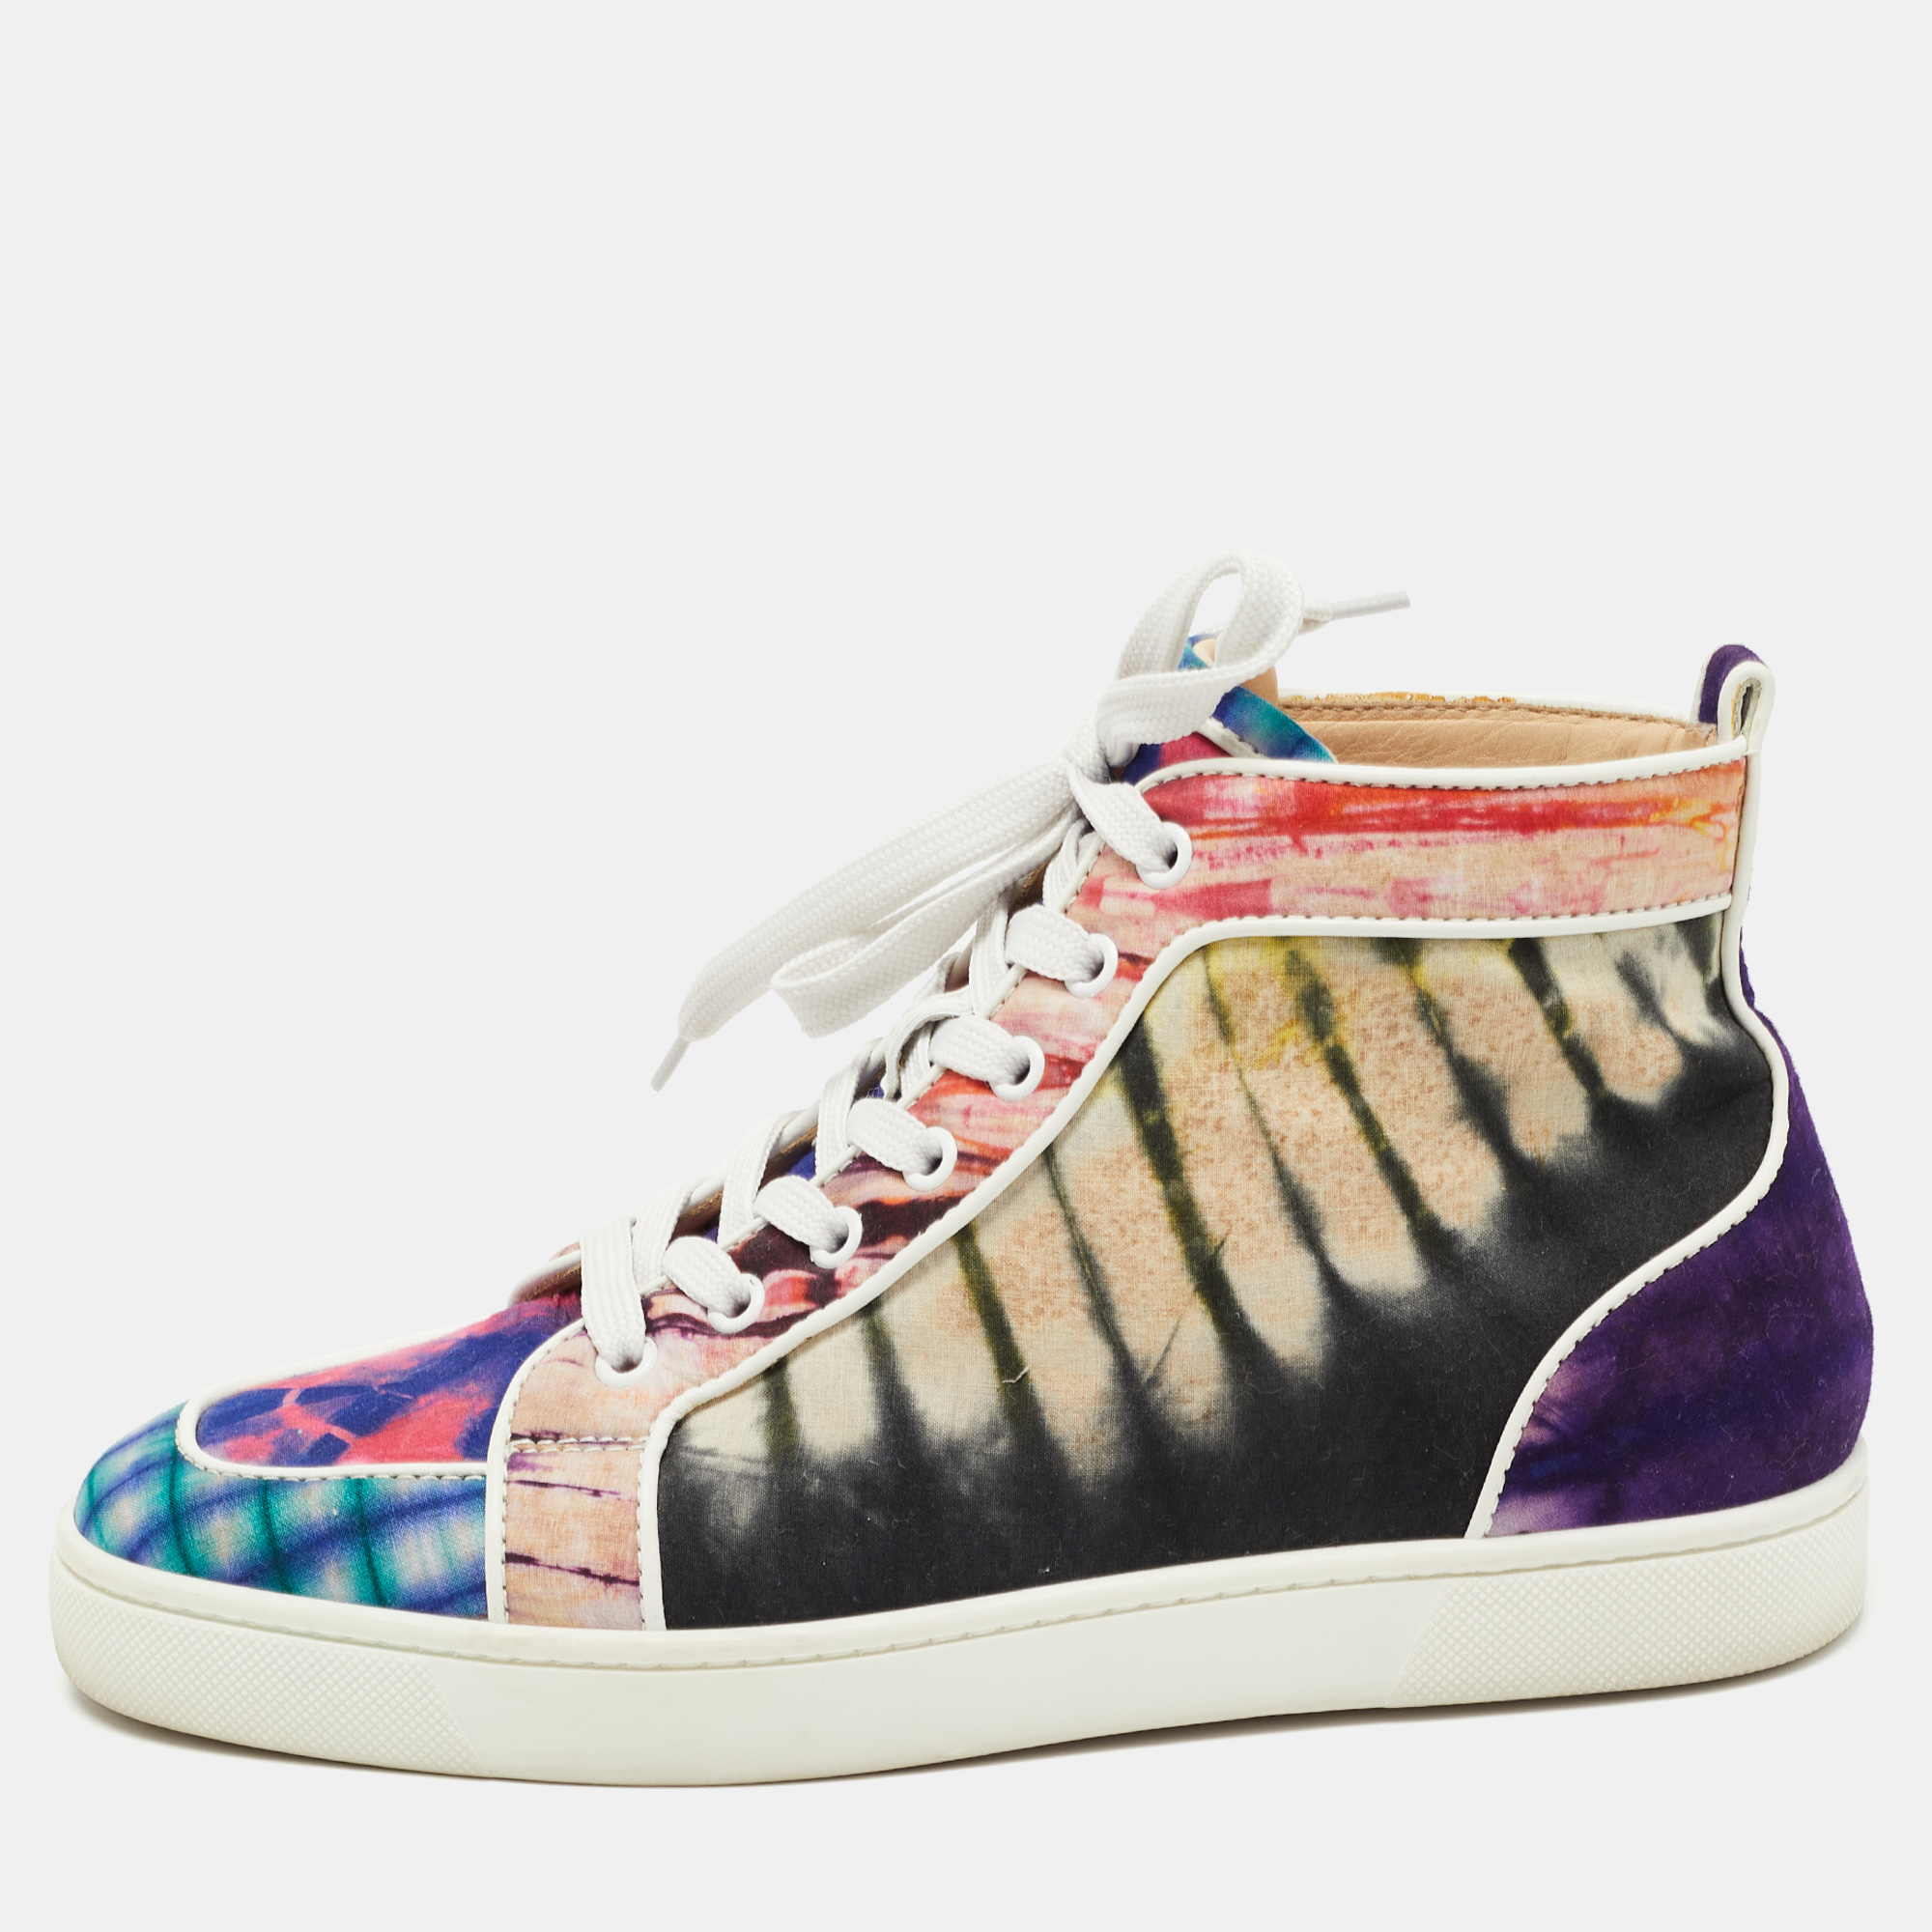 

Christian Louboutin Multicolor Fabric Tie Dye High Top Sneakers Size